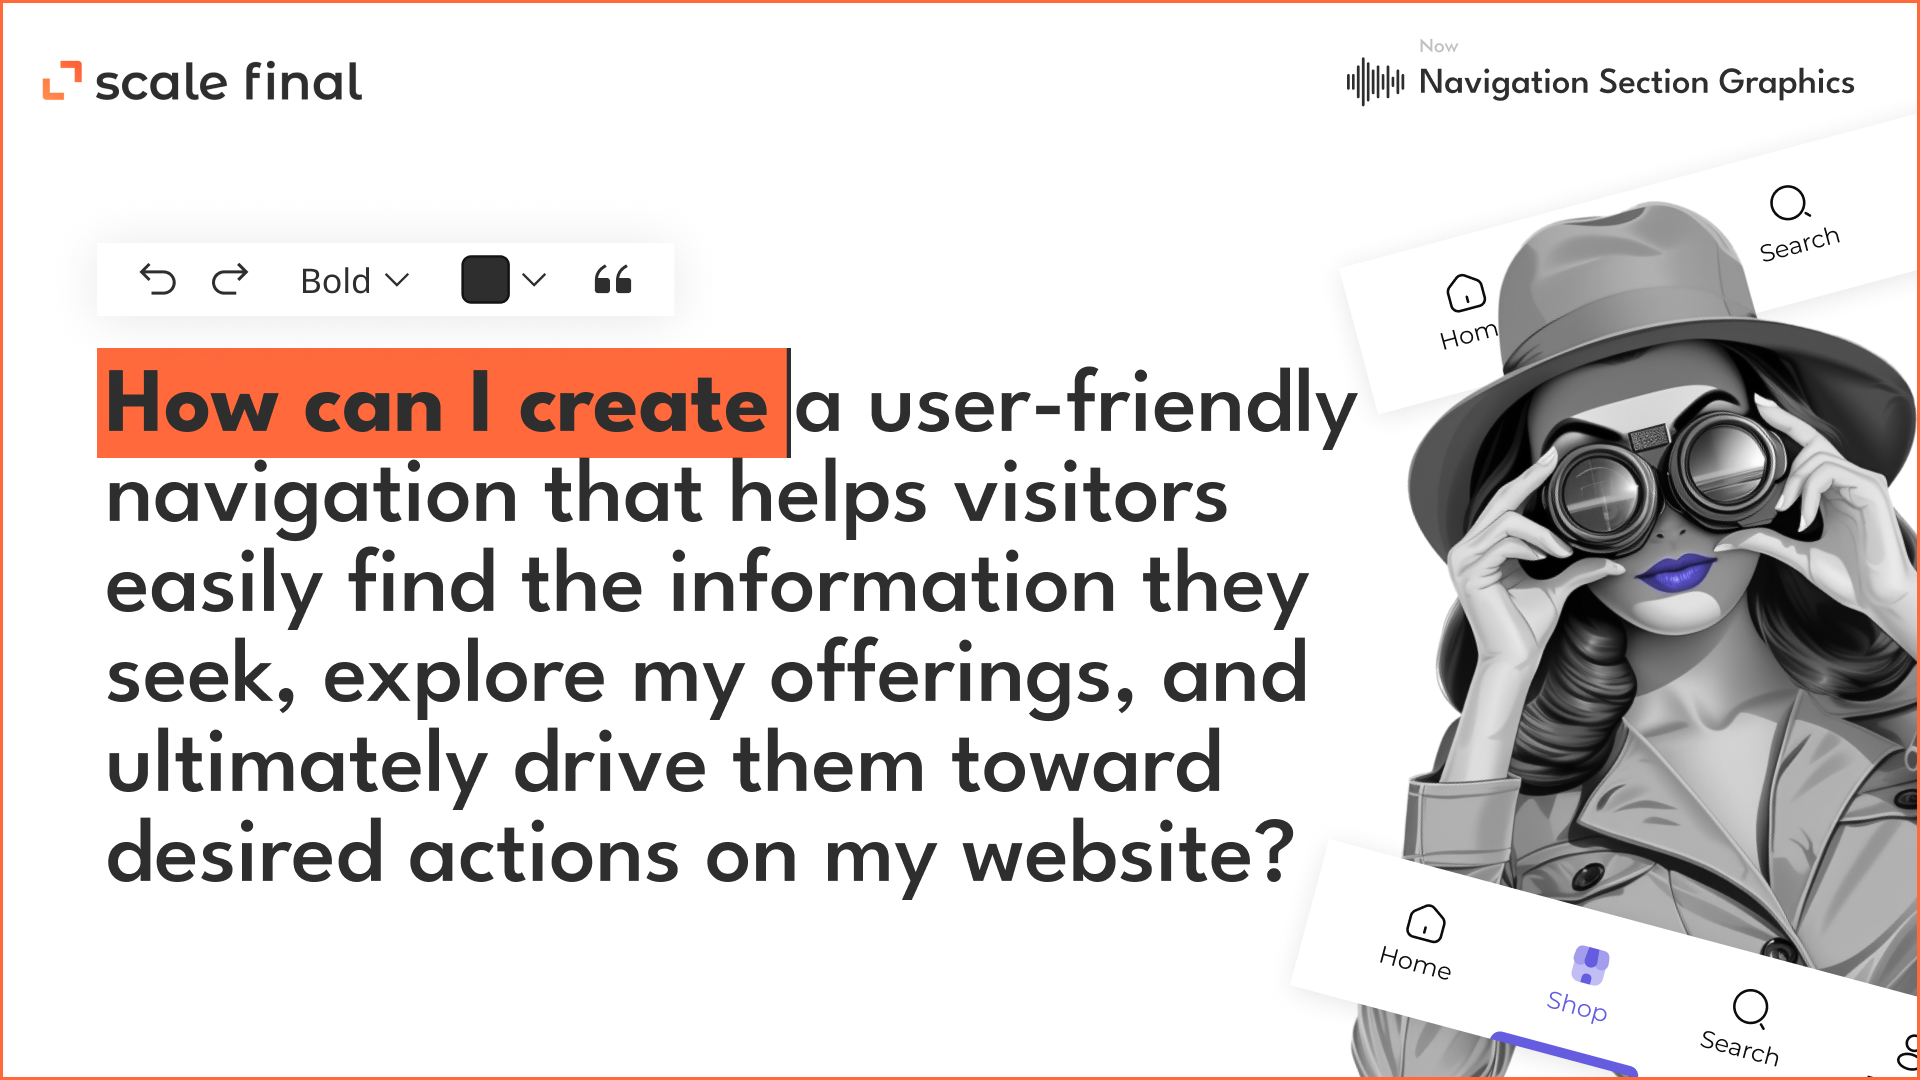 Navigation: How can I create a user-friendly navigation that helps visitors easily find the information they seek, explore my offerings, and ultimately drive them toward desired actions on my website?